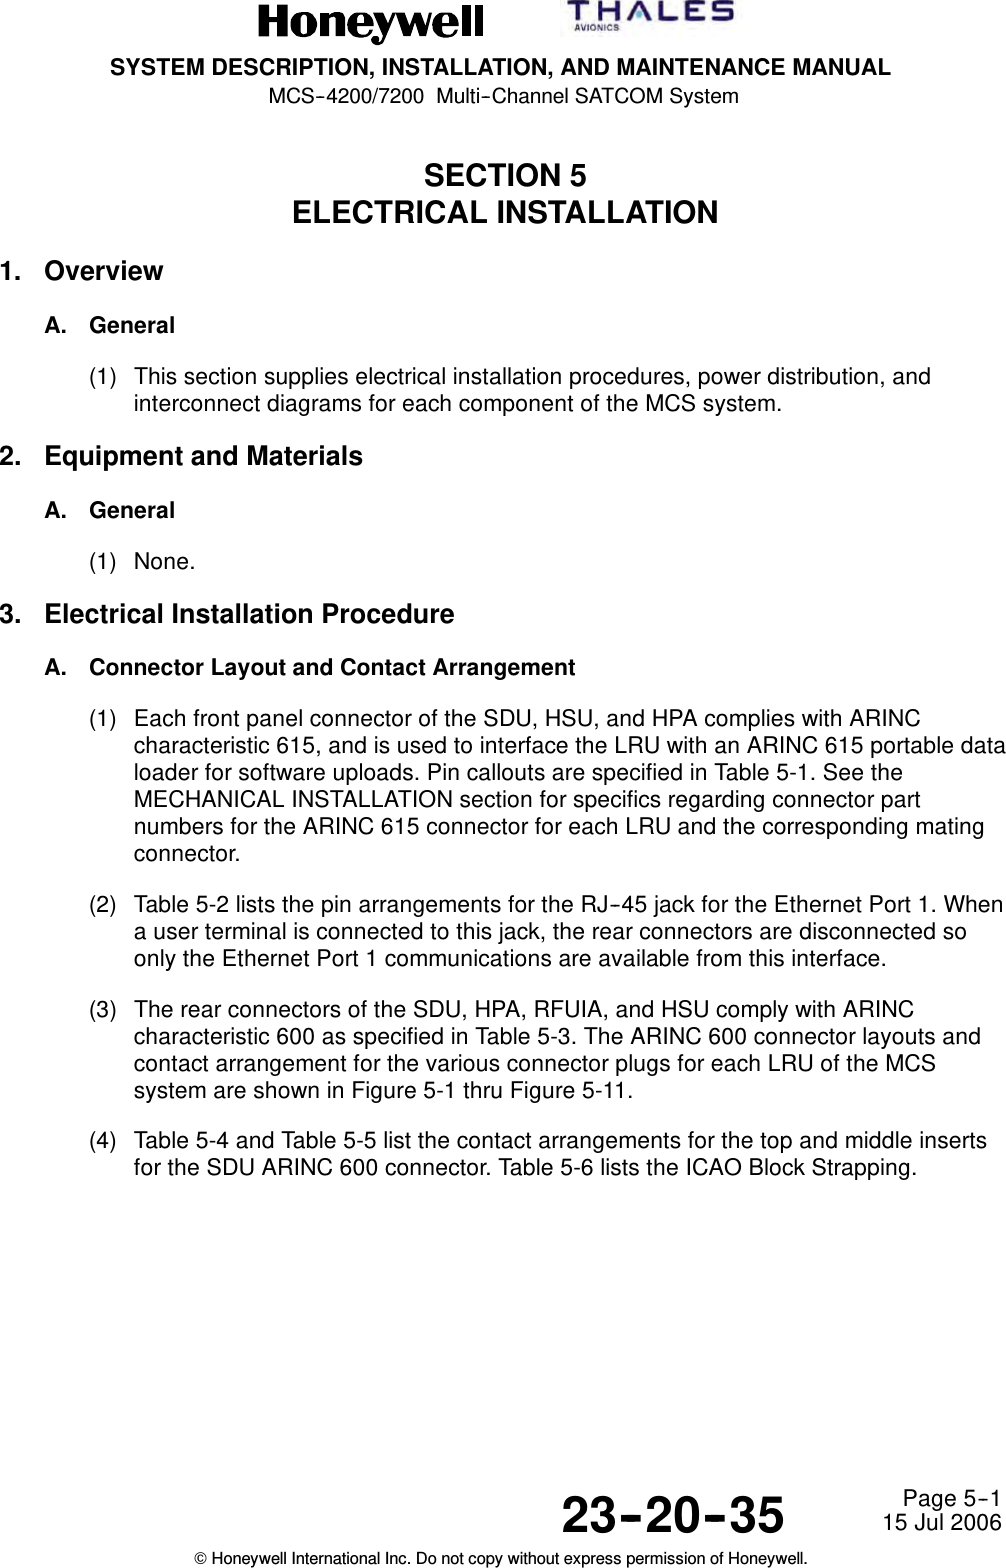 SYSTEM DESCRIPTION, INSTALLATION, AND MAINTENANCE MANUALMCS--4200/7200 Multi--Channel SATCOM System23--20--35 15 Jul 2006Honeywell International Inc. Do not copy without express permission of Honeywell.Page 5--1SECTION 5ELECTRICAL INSTALLATION1. OverviewA. General(1) This section supplies electrical installation procedures, power distribution, andinterconnect diagrams for each component of the MCS system.2. Equipment and MaterialsA. General(1) None.3. Electrical Installation ProcedureA. Connector Layout and Contact Arrangement(1) Each front panel connector of the SDU, HSU, and HPA complies with ARINCcharacteristic 615, and is used to interface the LRU with an ARINC 615 portable dataloader for software uploads. Pin callouts are specified in Table 5-1. See theMECHANICAL INSTALLATION section for specifics regarding connector partnumbers for the ARINC 615 connector for each LRU and the corresponding matingconnector.(2) Table 5-2 lists the pin arrangements for the RJ--45 jack for the Ethernet Port 1. Whena user terminal is connected to this jack, the rear connectors are disconnected soonly the Ethernet Port 1 communications are available from this interface.(3) The rear connectors of the SDU, HPA, RFUIA, and HSU comply with ARINCcharacteristic 600 as specified in Table 5-3. The ARINC 600 connector layouts andcontact arrangement for the various connector plugs for each LRU of the MCSsystem are shown in Figure 5-1 thru Figure 5-11.(4) Table 5-4 and Table 5-5 list the contact arrangements for the top and middle insertsfor the SDU ARINC 600 connector. Table 5-6 lists the ICAO Block Strapping.